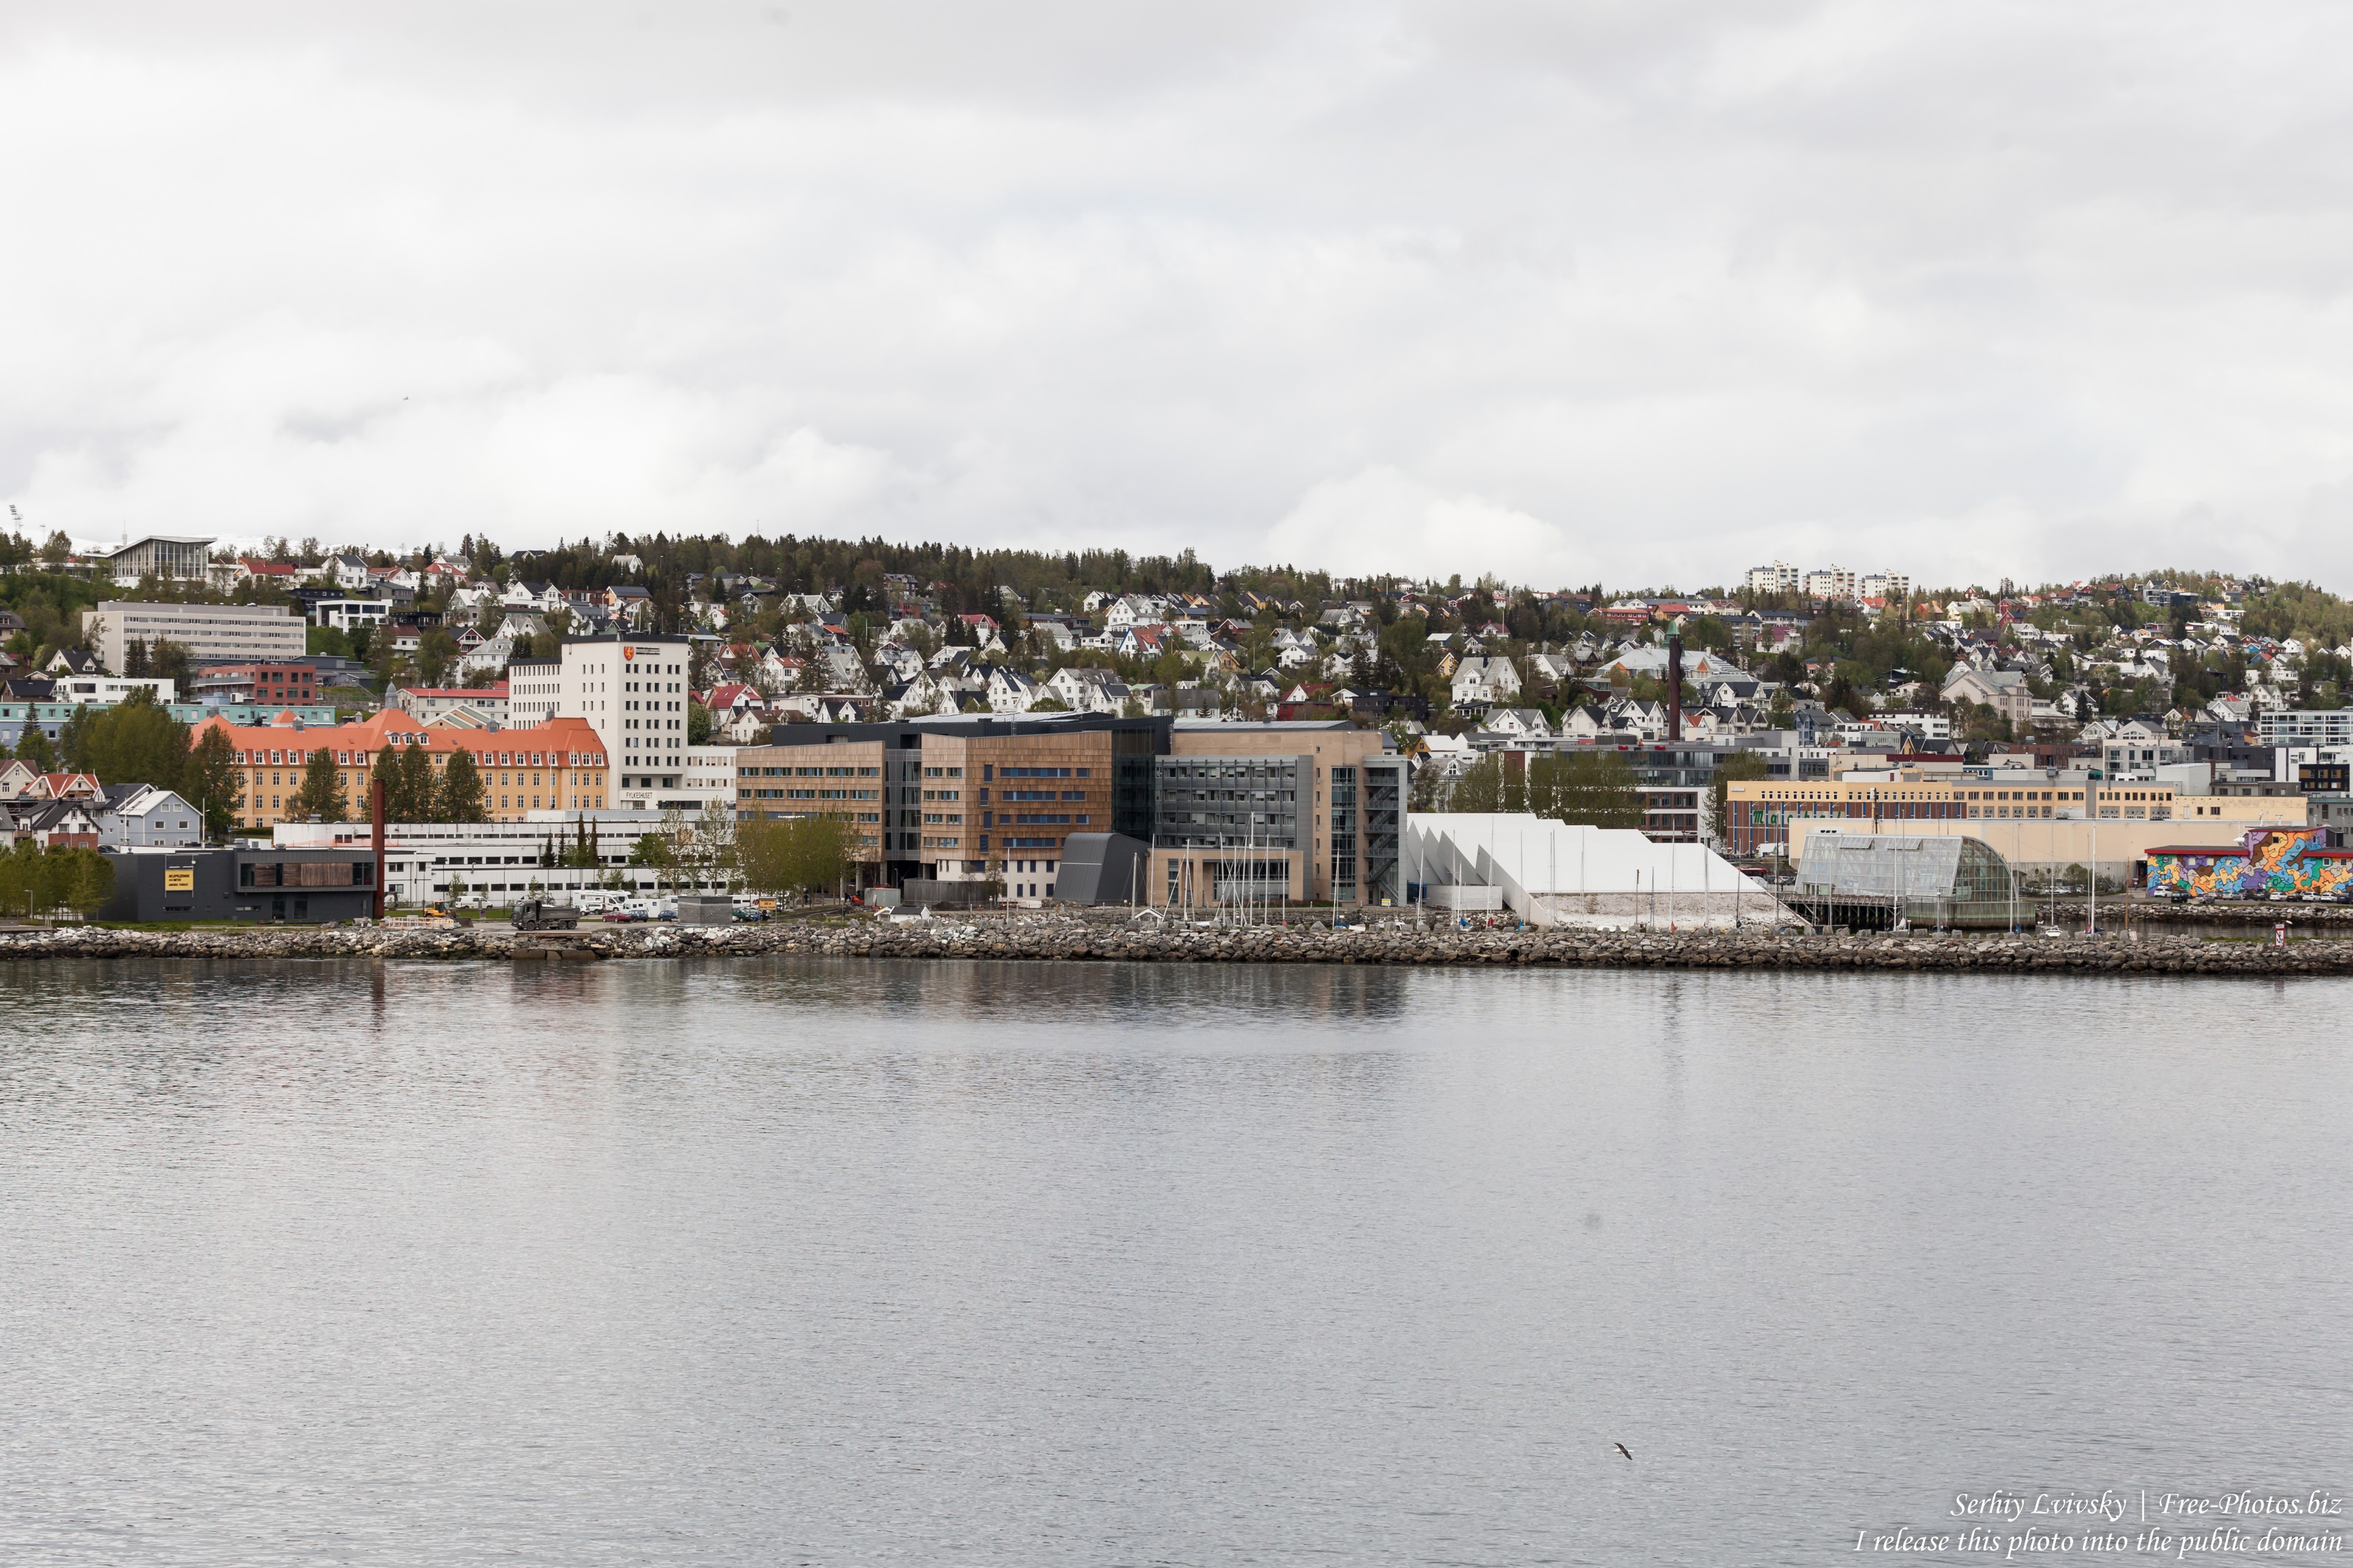 Tromso, Norway, photographed in June 2018 by Serhiy Lvivsky, picture 27